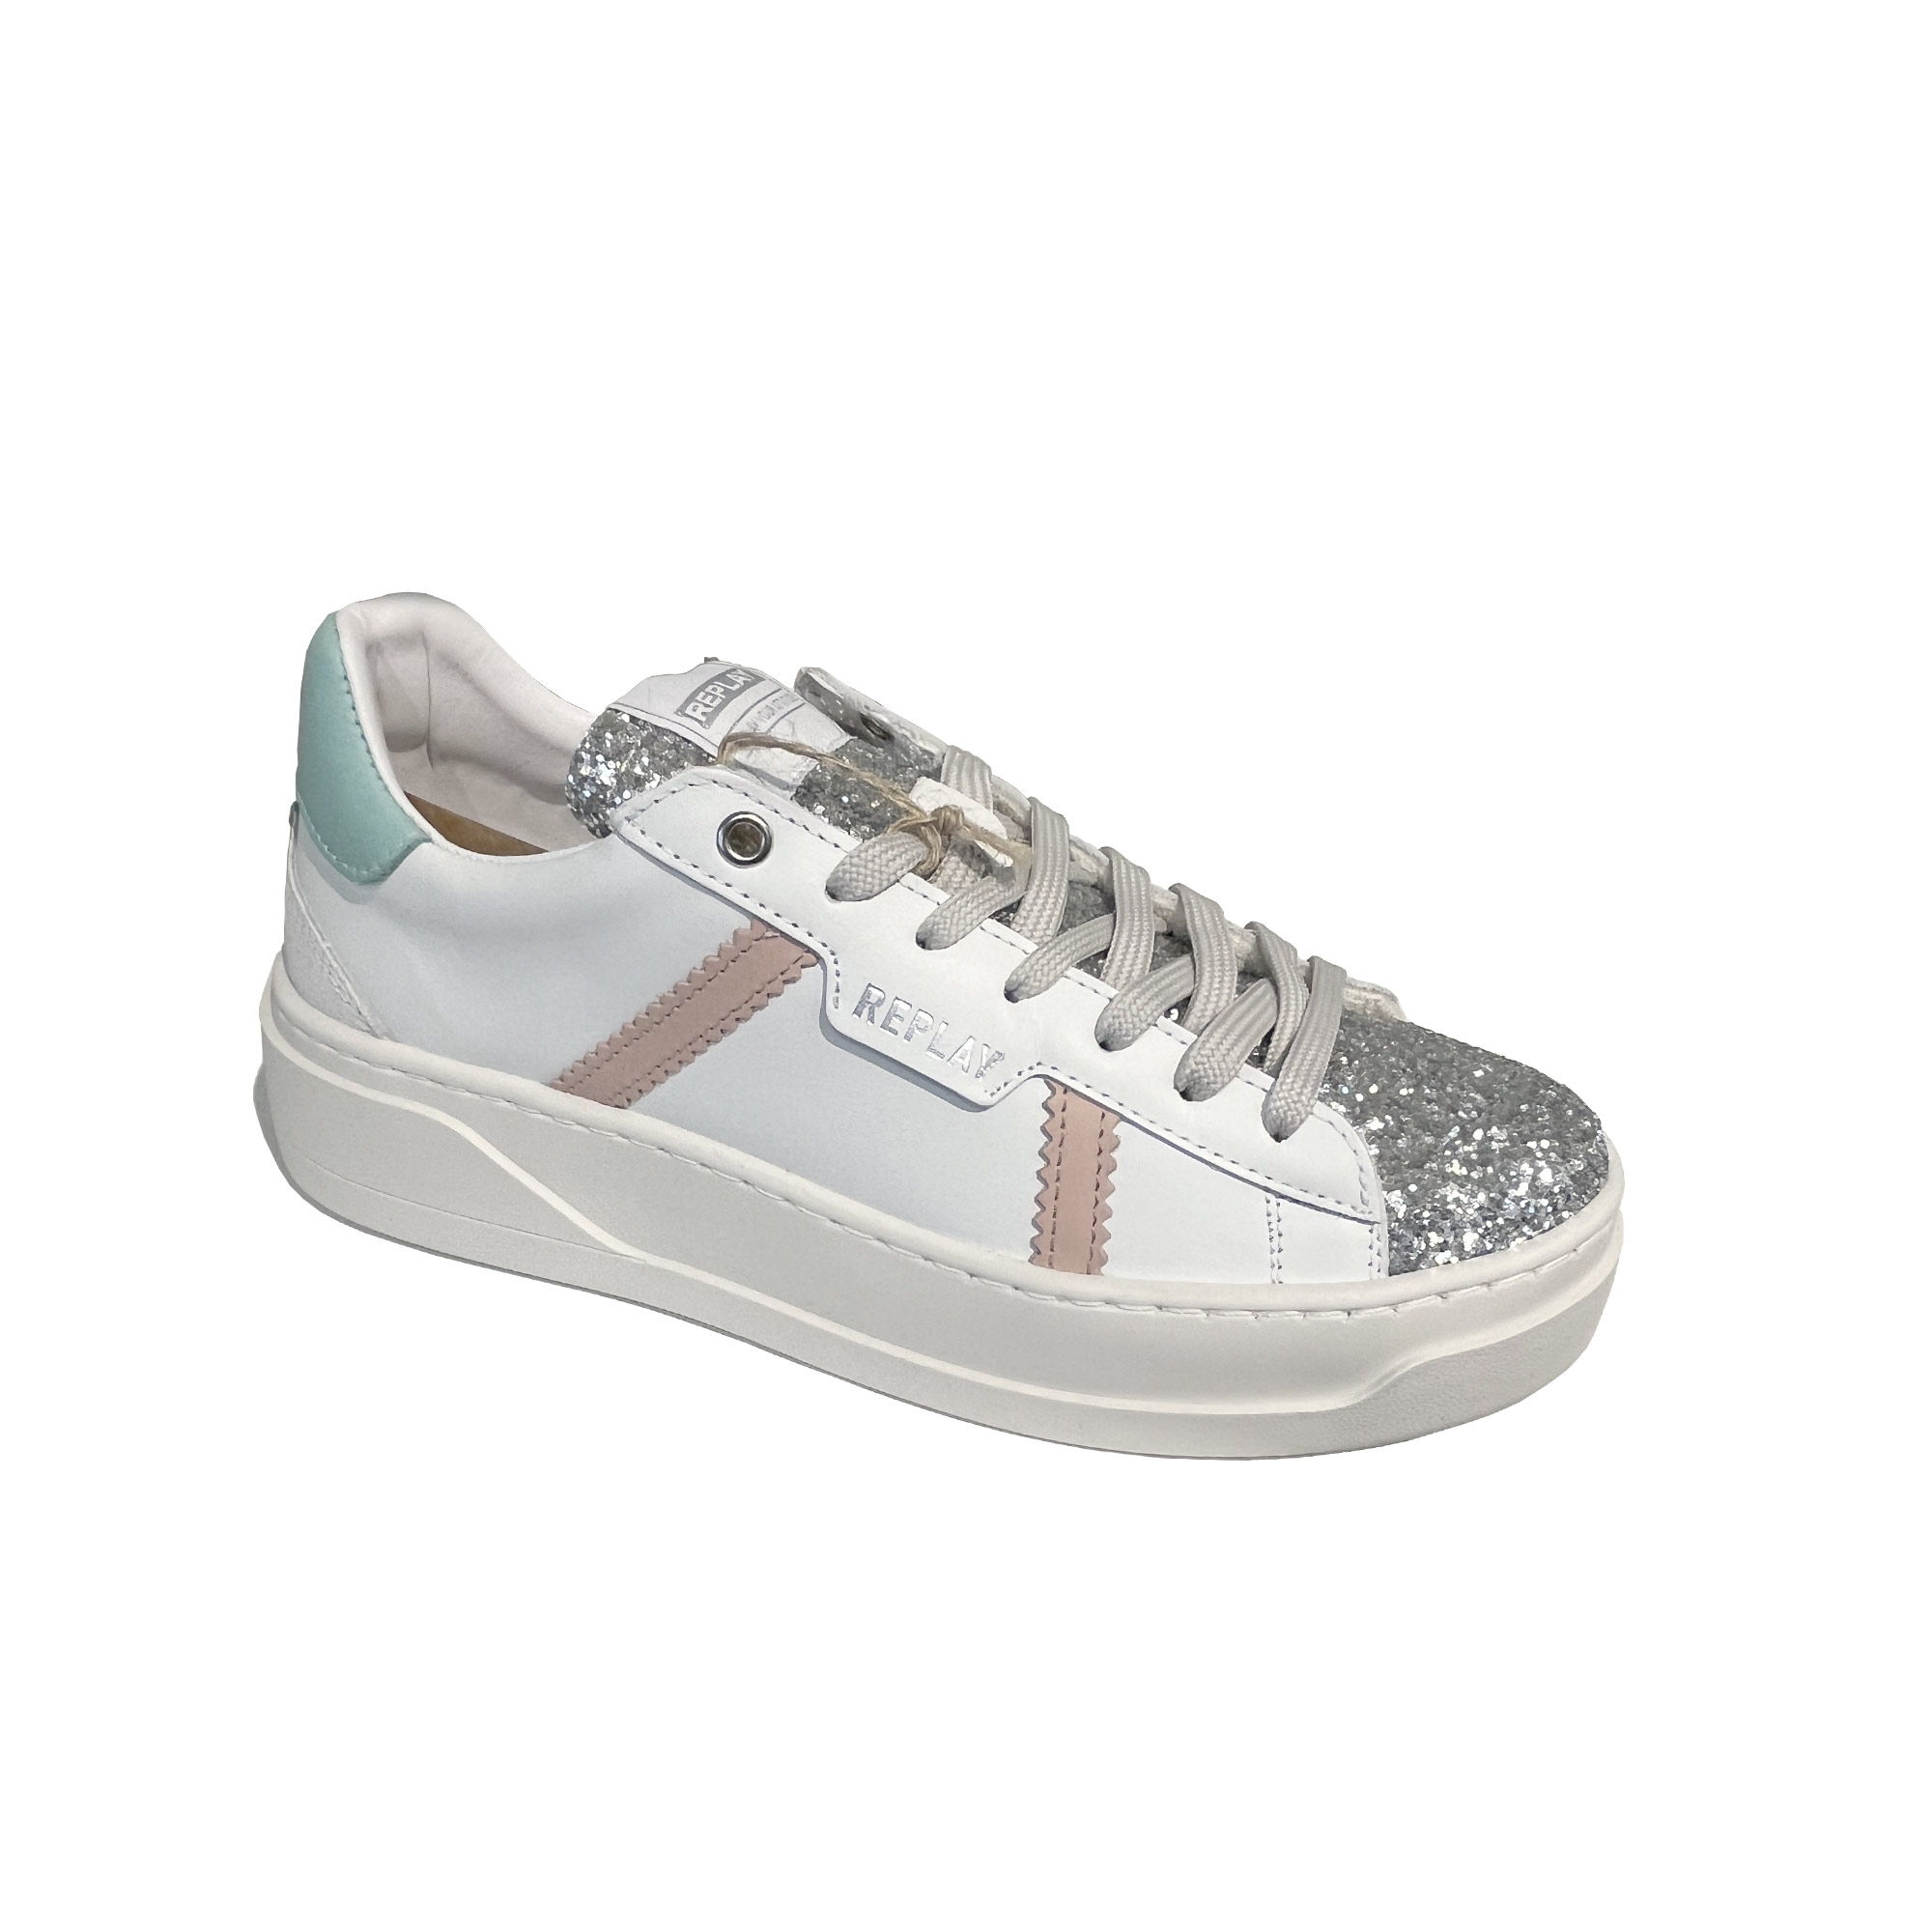 REPLAY Pride Vanity Lace Up Leather Sneakers for Women - Silver Off White